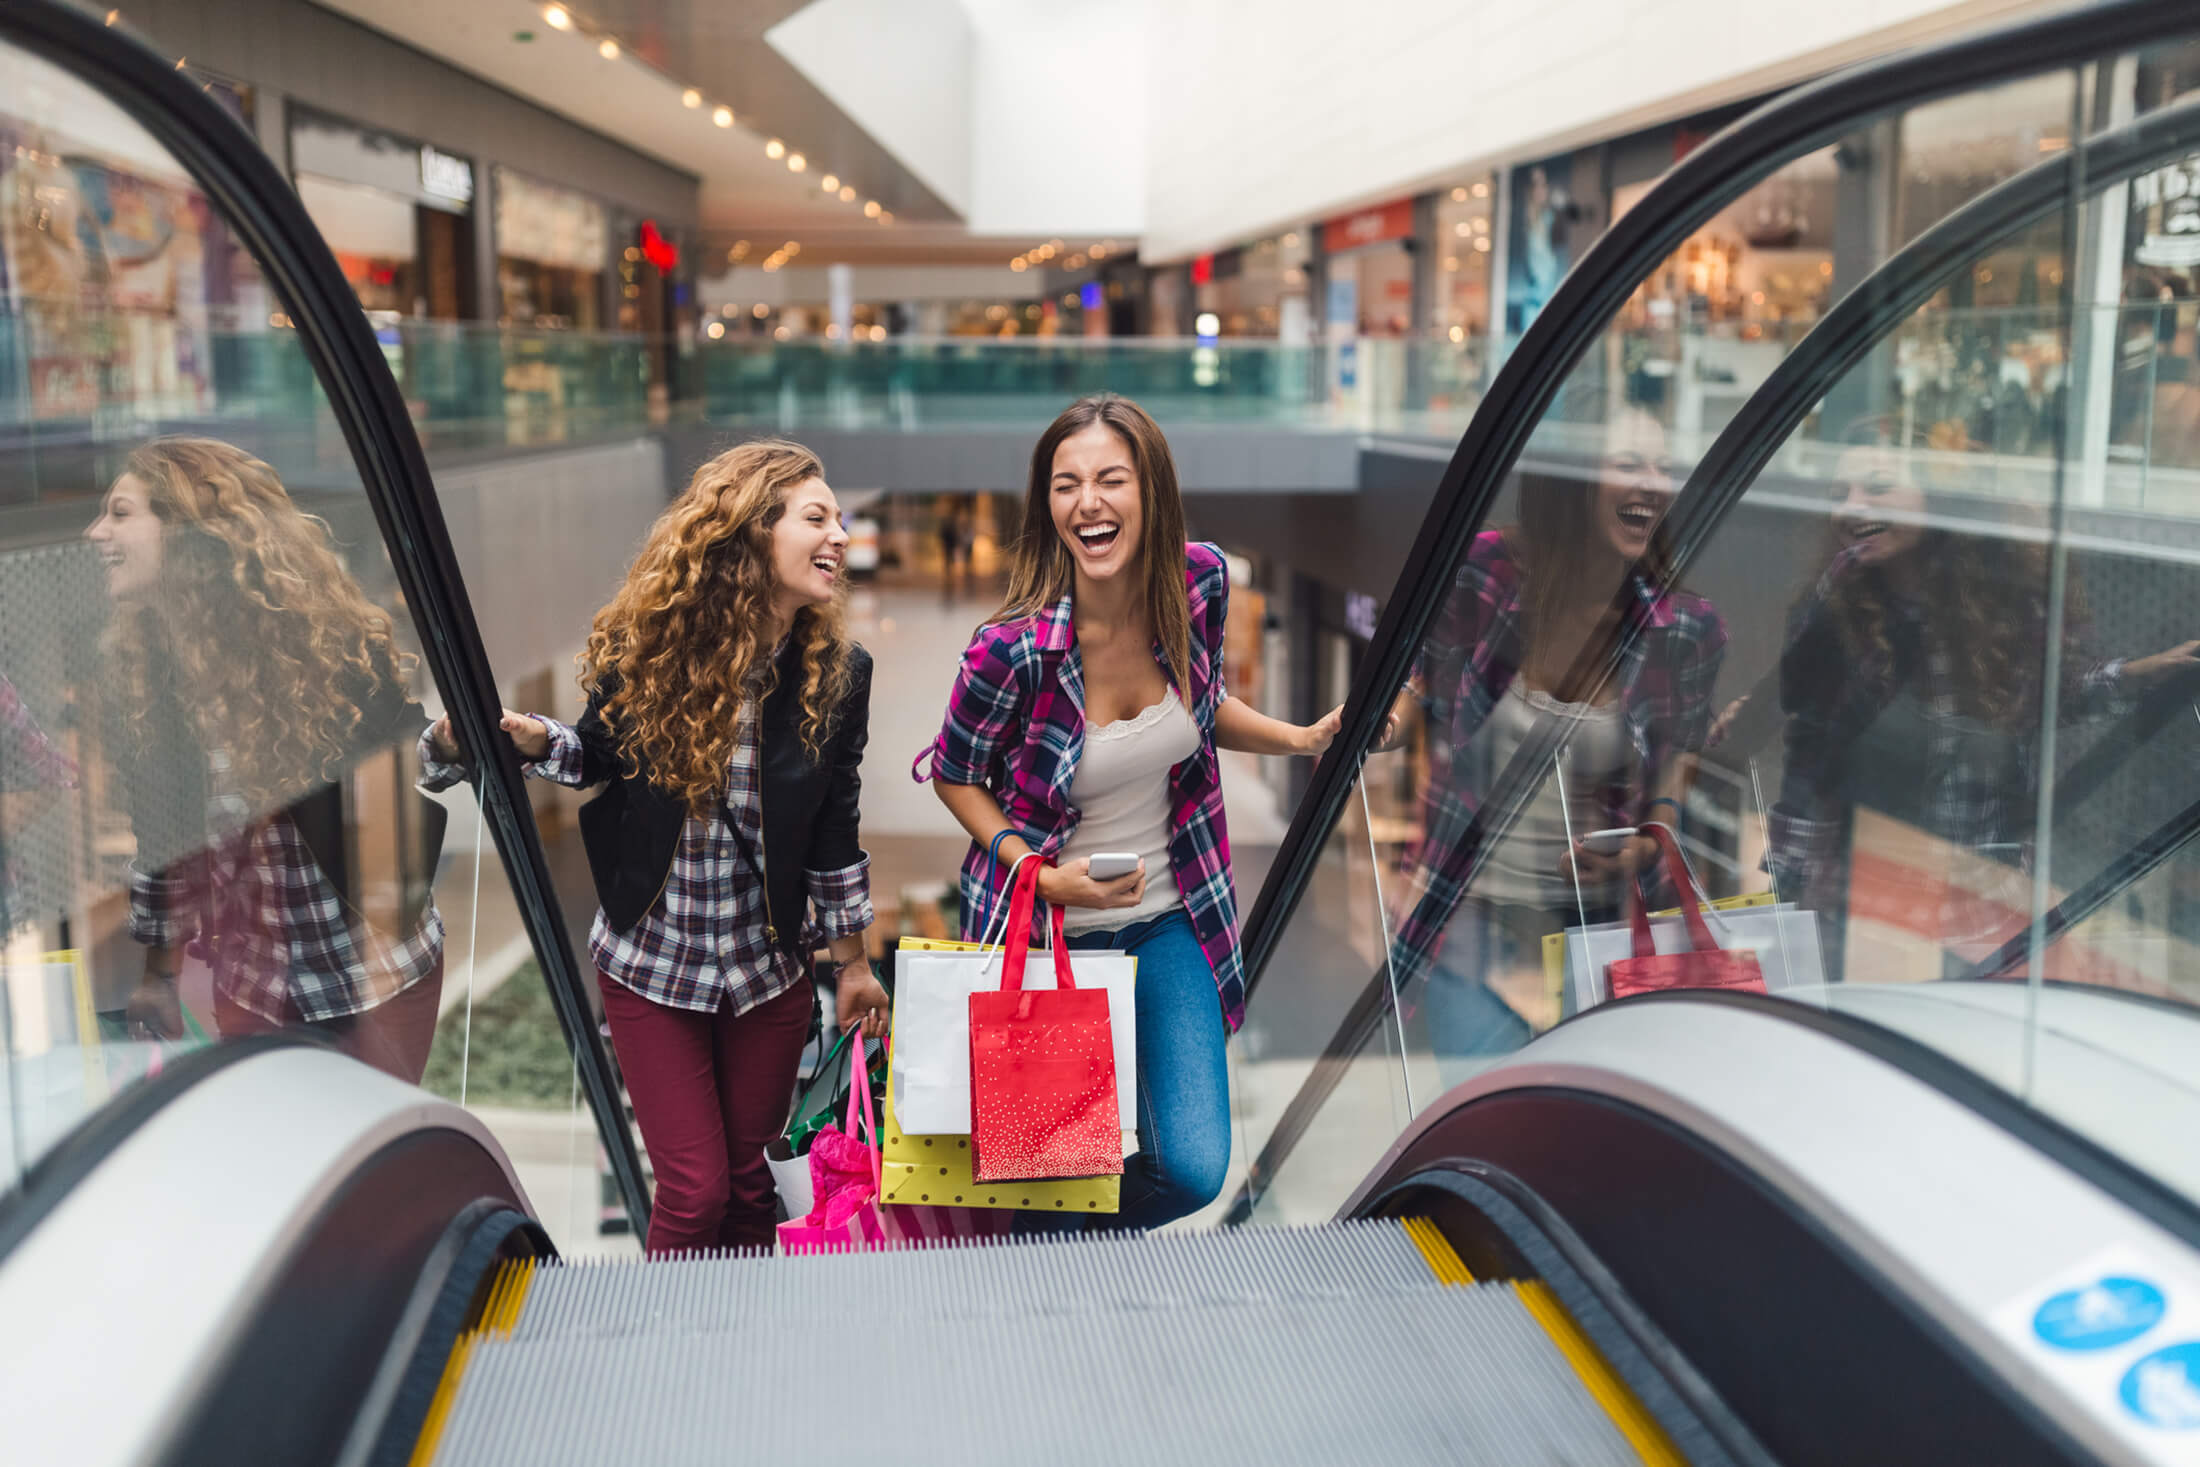 Two gals laughing on an escalator in a shopping mall